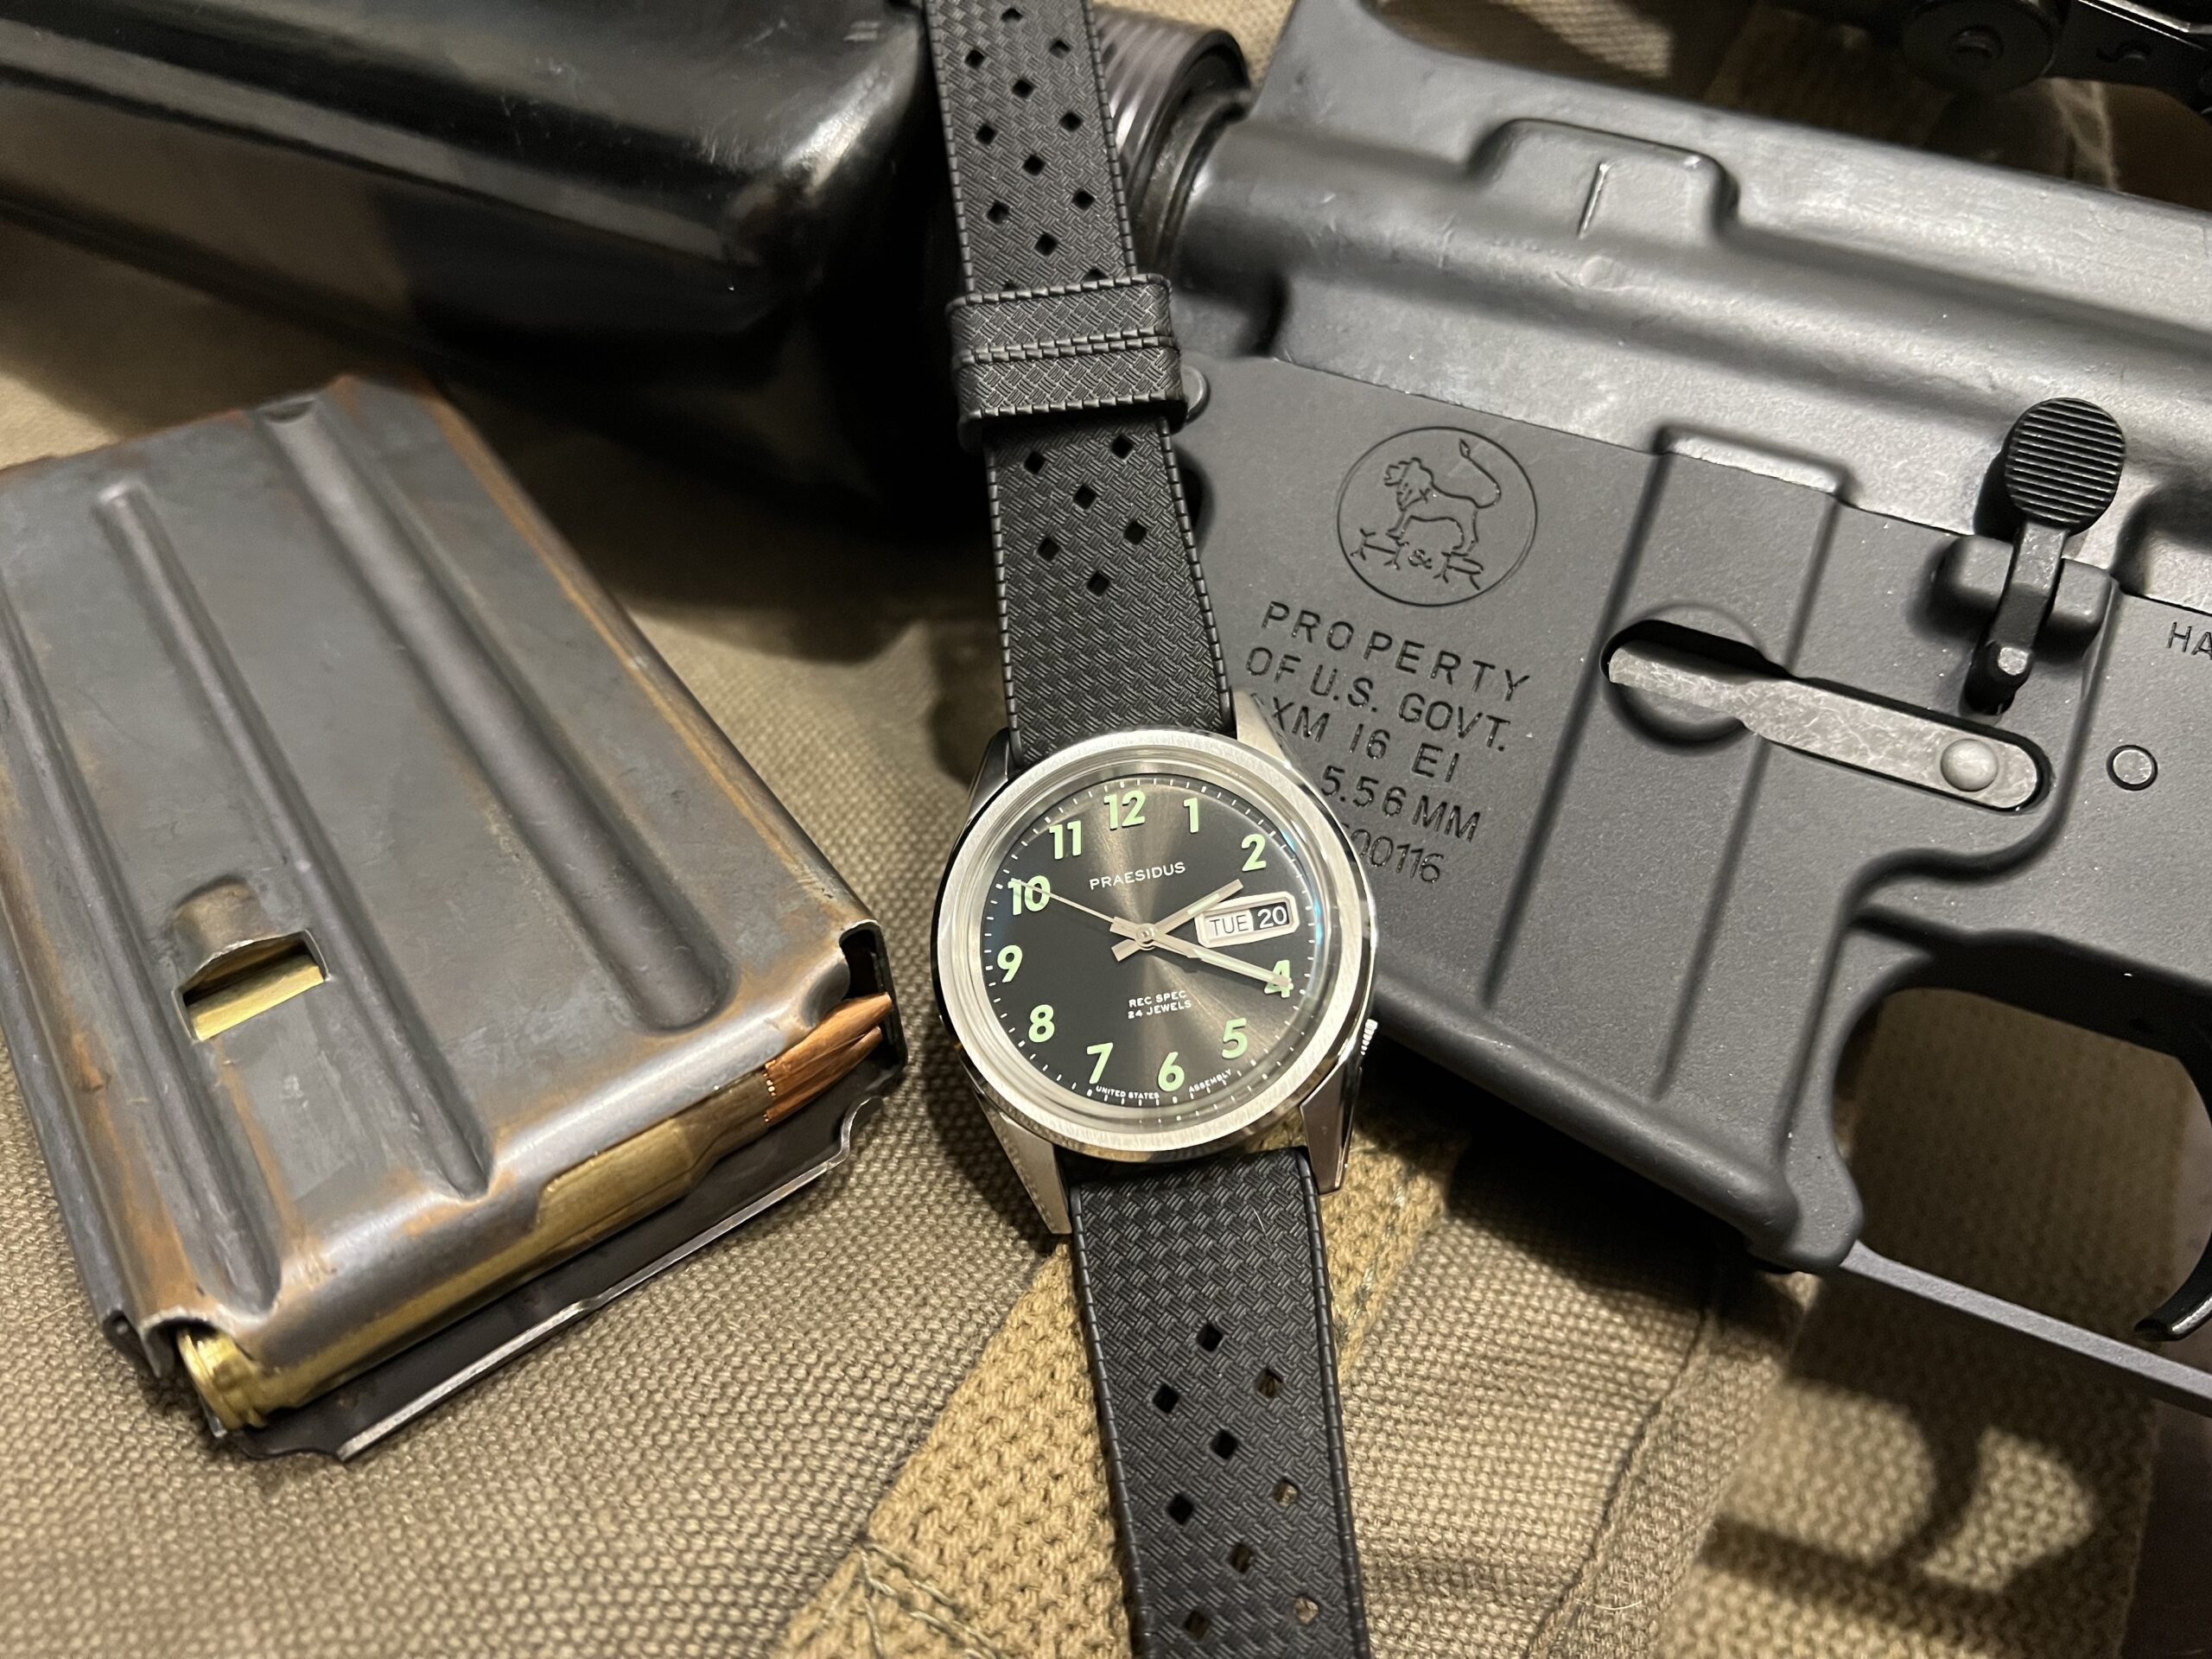 <em>Whereas the Dirty Dozen watches were designed for military use under a government contract, the MACV-SOG Seikos were designed as convenient, consumer dress watches and purchased off-the-shelf (WATM/Miguel)</em>